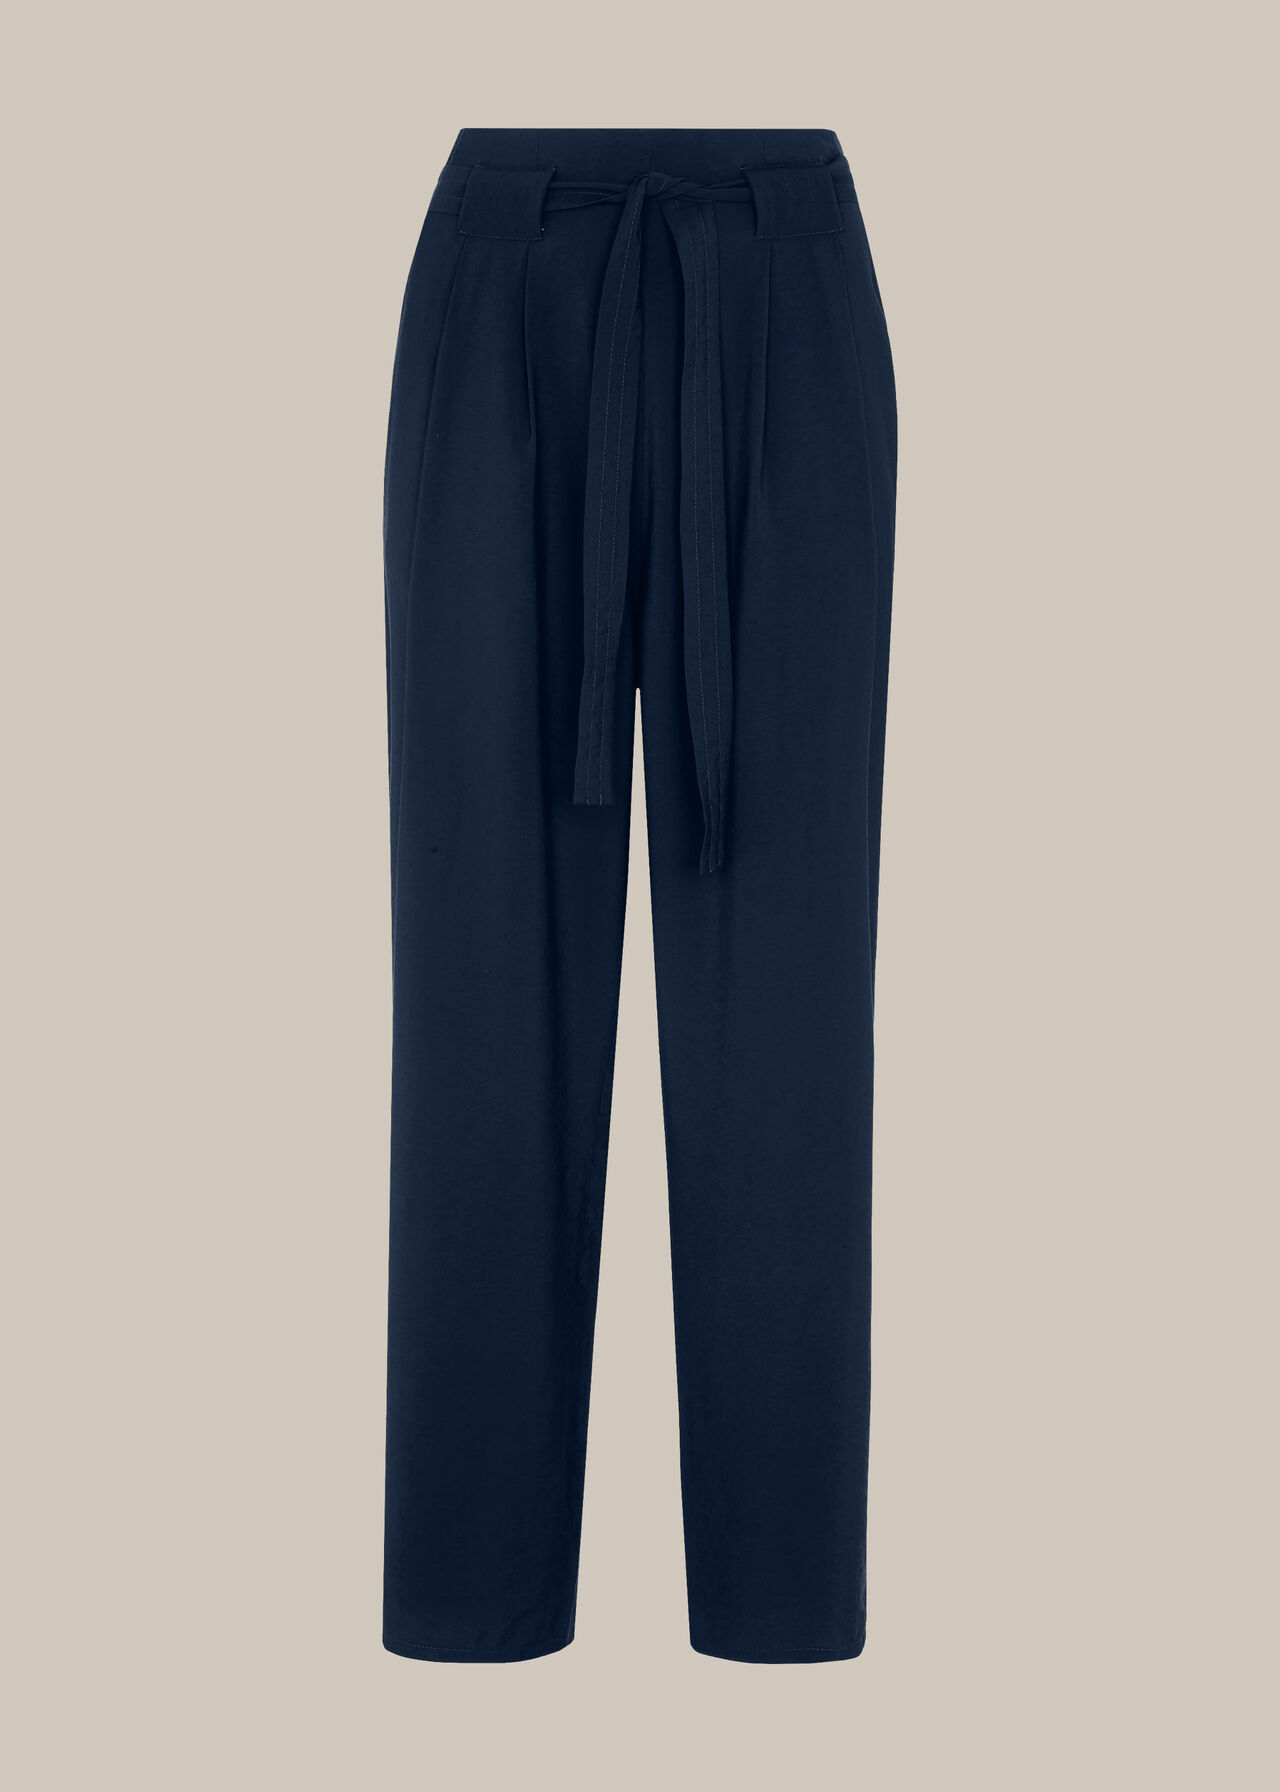 Belted Casual Crop Trouser Navy 